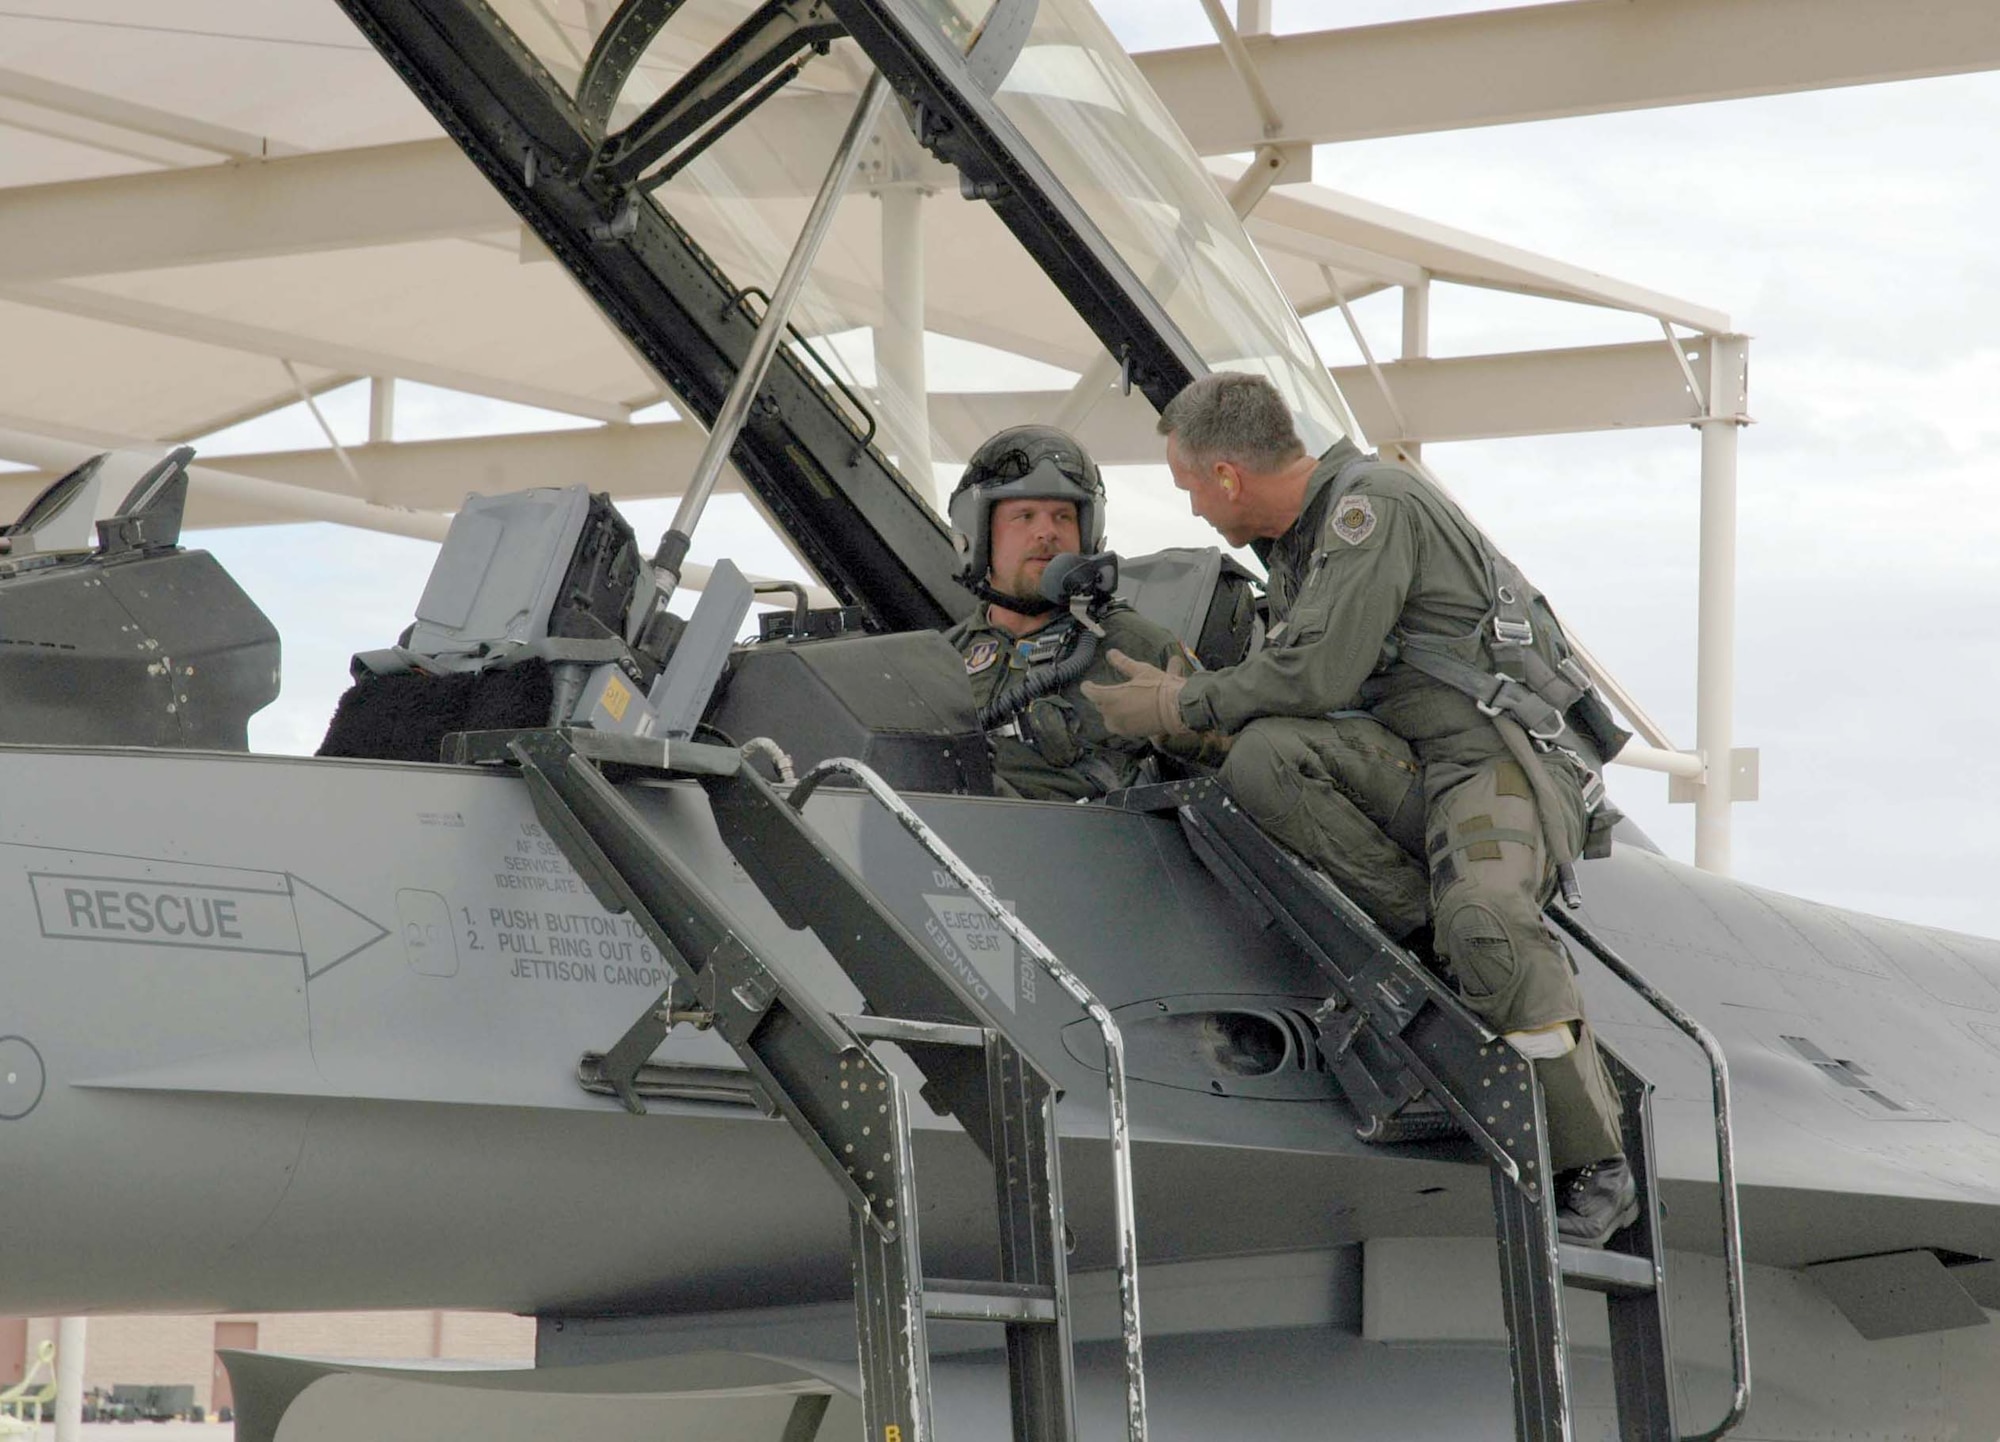 Col. William Binger, 944th Operations Group commander, goes over the F-16 with Kevin Millwood, Texas Rangers pitcher, before their flight March 28. Mr. Millwood, a strong supporter of the U.S. Air Force mission, is currently participating in spring training at the Surprise Stadium, located near Luke Air Force Base, Ariz. (U.S. Air Force Reserve photo by Staff Sgt. Susan Stout)